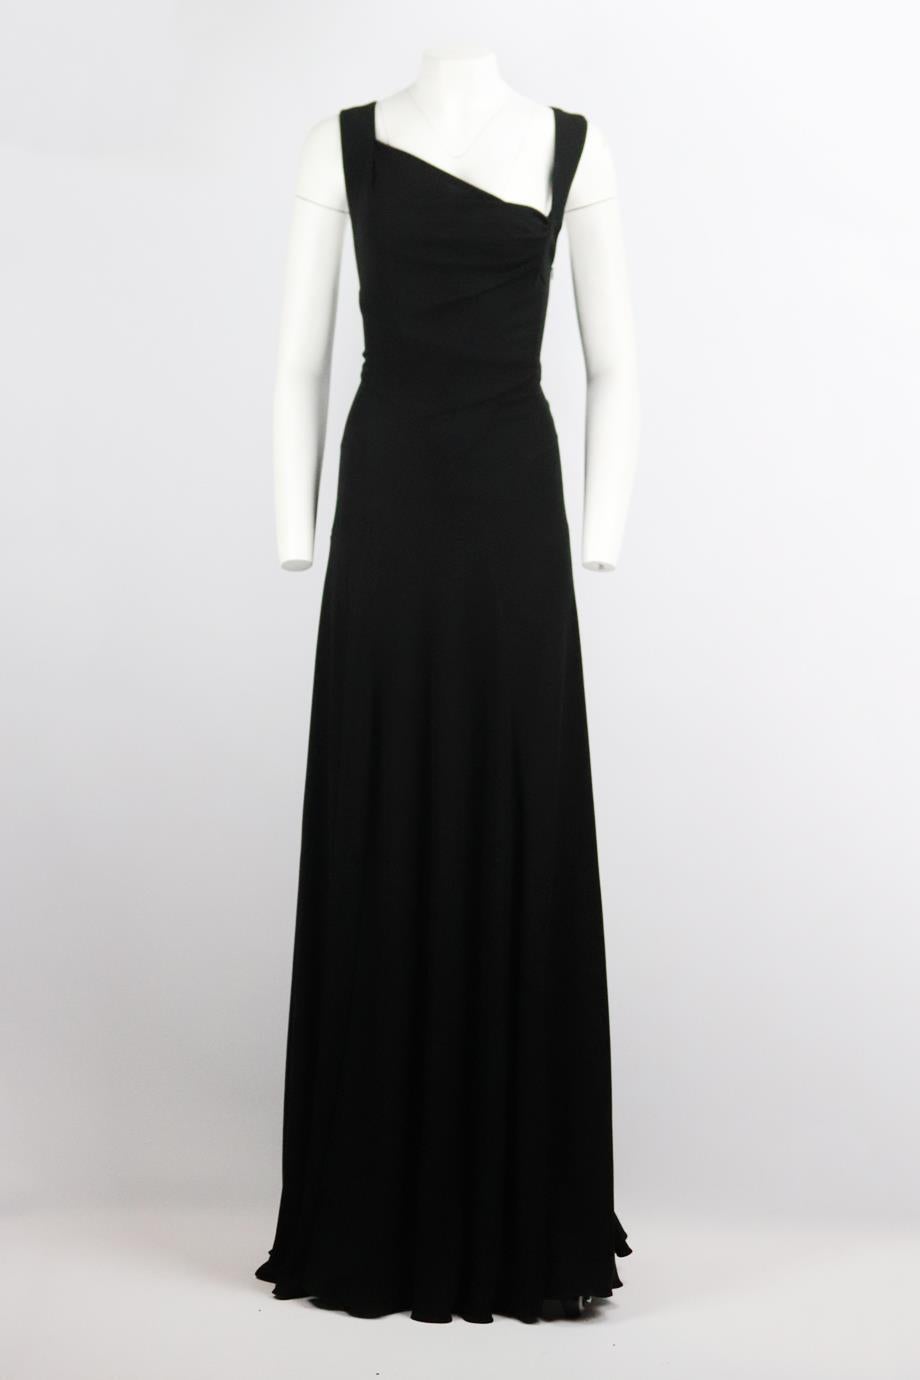 Azzedine Alaïa draped jersey gown. Black. Sleeveless, v-neck. Zip fastening at side. 100% Viscose. Size: FR 42 (UK 14, US 10, IT 46). Bust: 32 in. Waist: 26 in. Hips: 60 in. Length: 67 in
